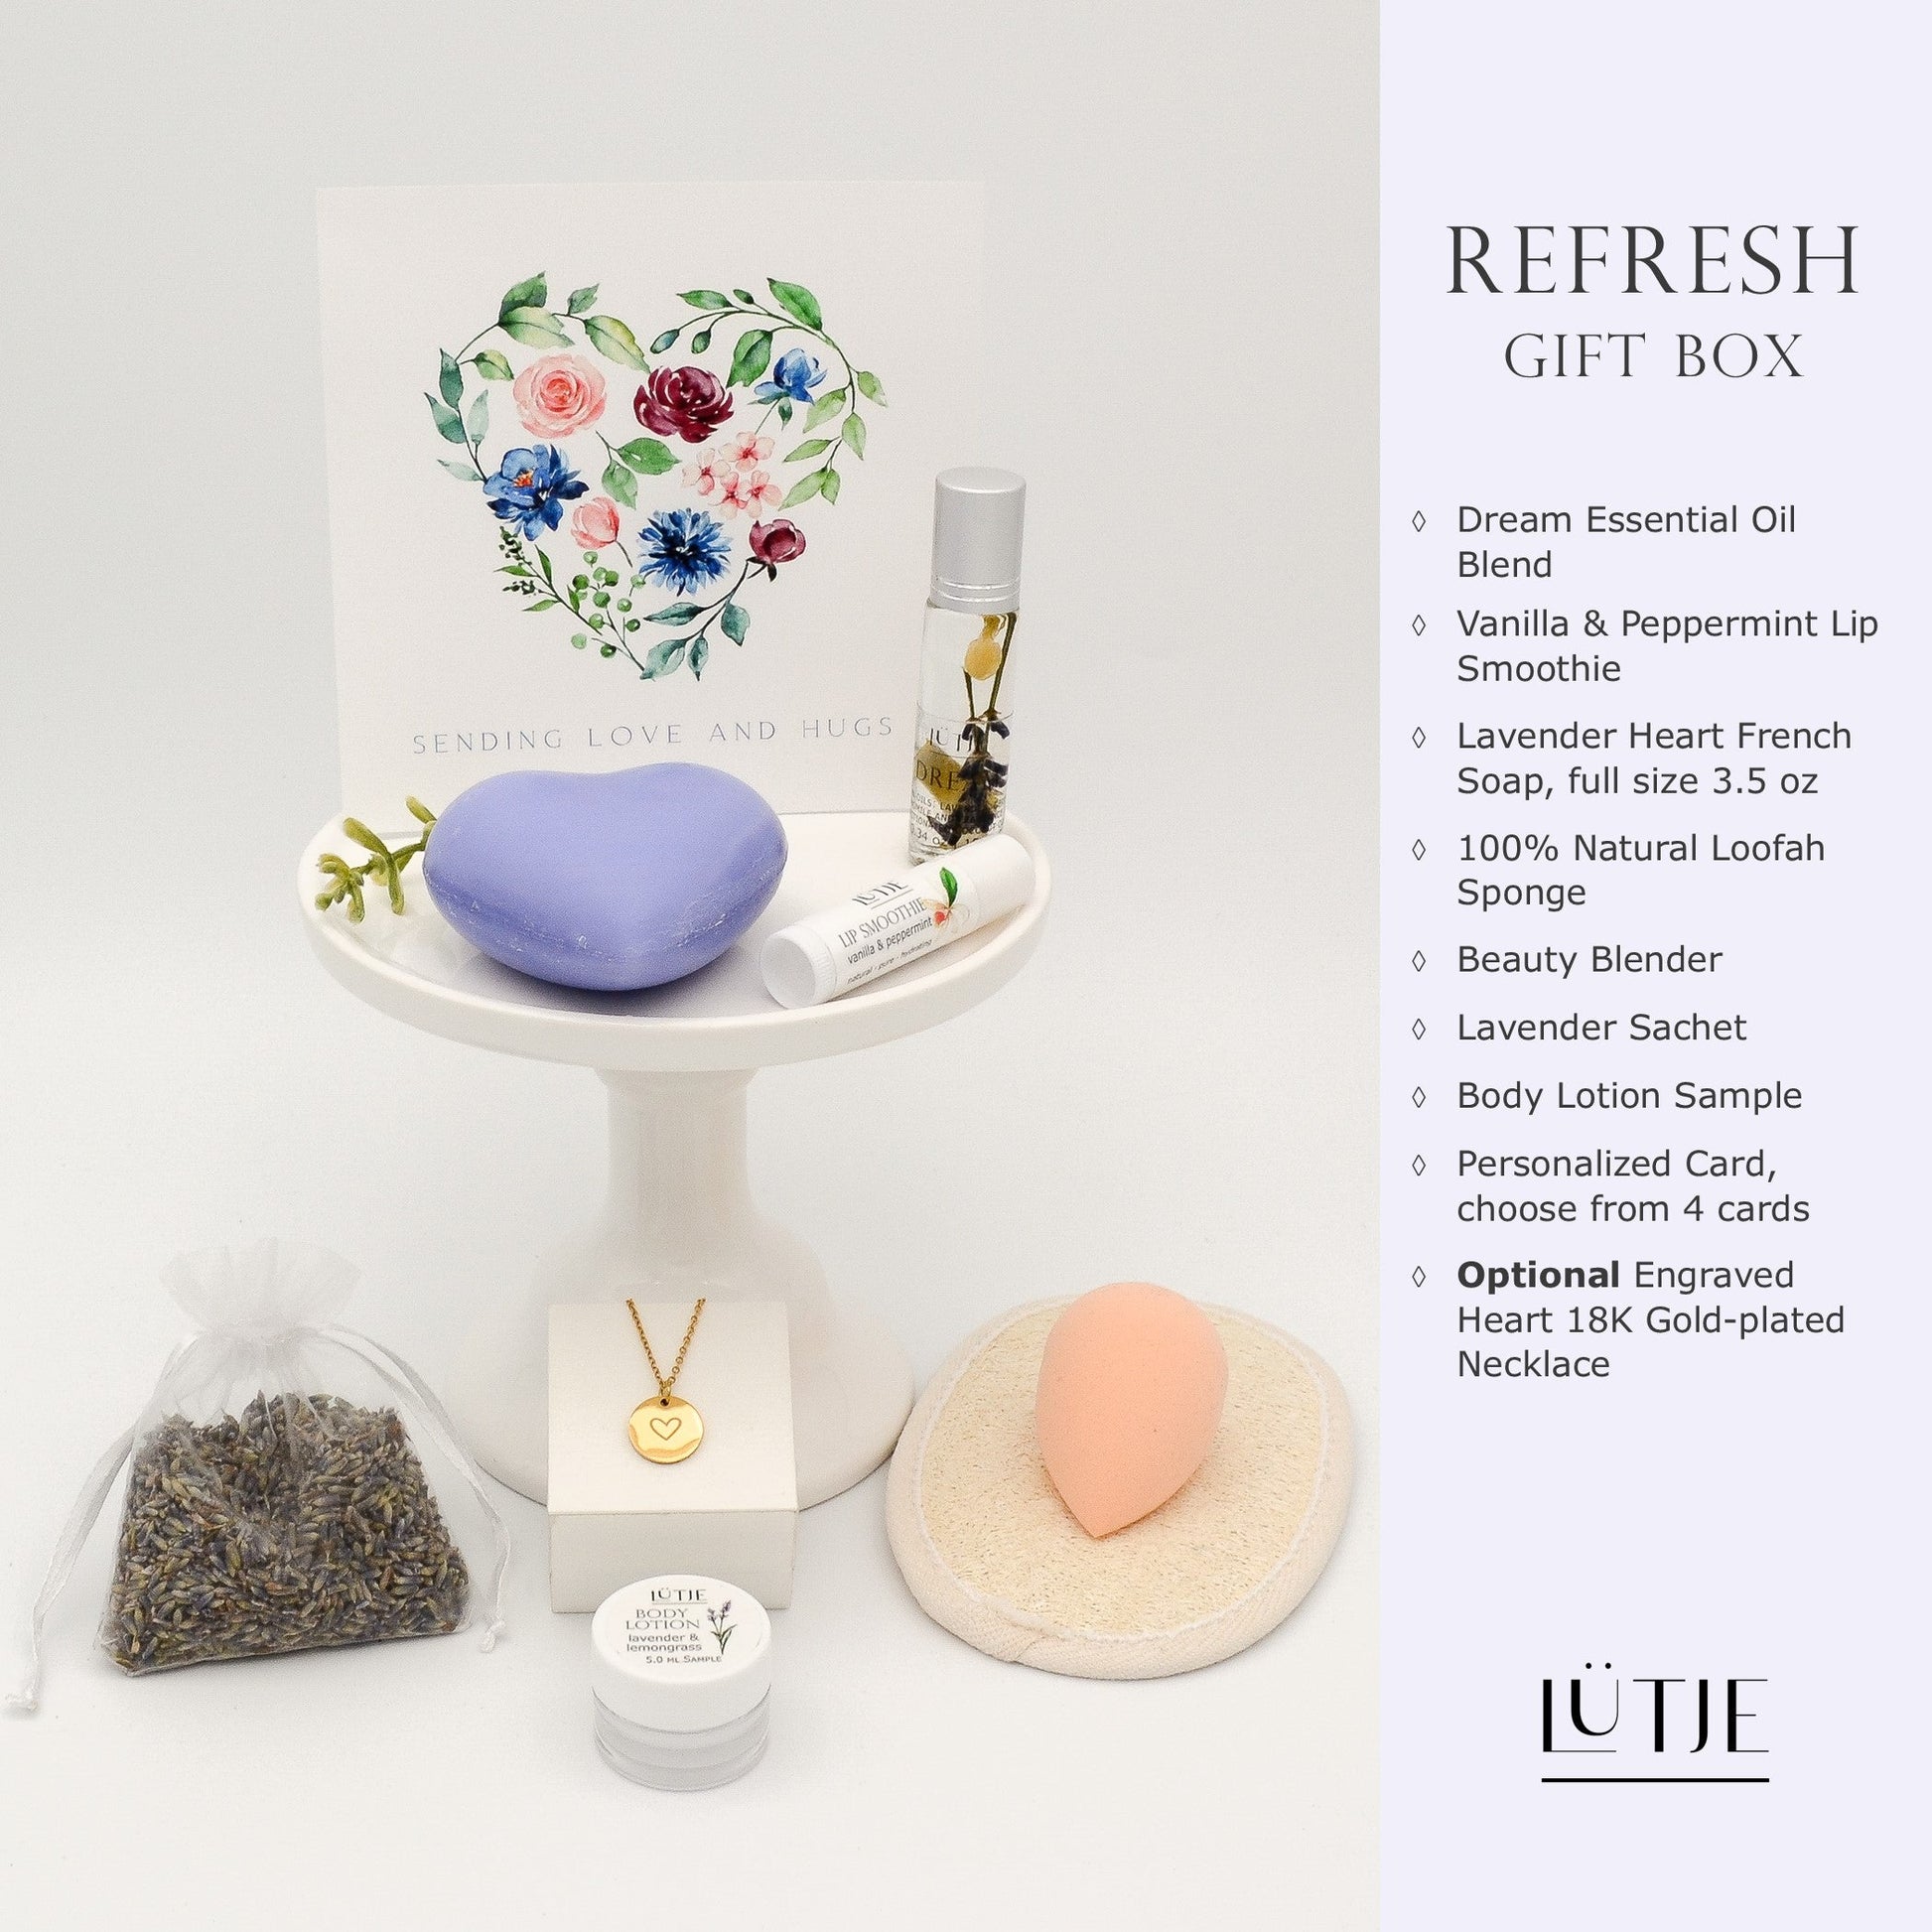 Refresh Gift Box for women, mom, BFF, wife, daughter, sister, or grandma, includes essential oil, French soap, lip balm, hydrating face mask, and optional 18K gold-plated necklace with engraved heart.